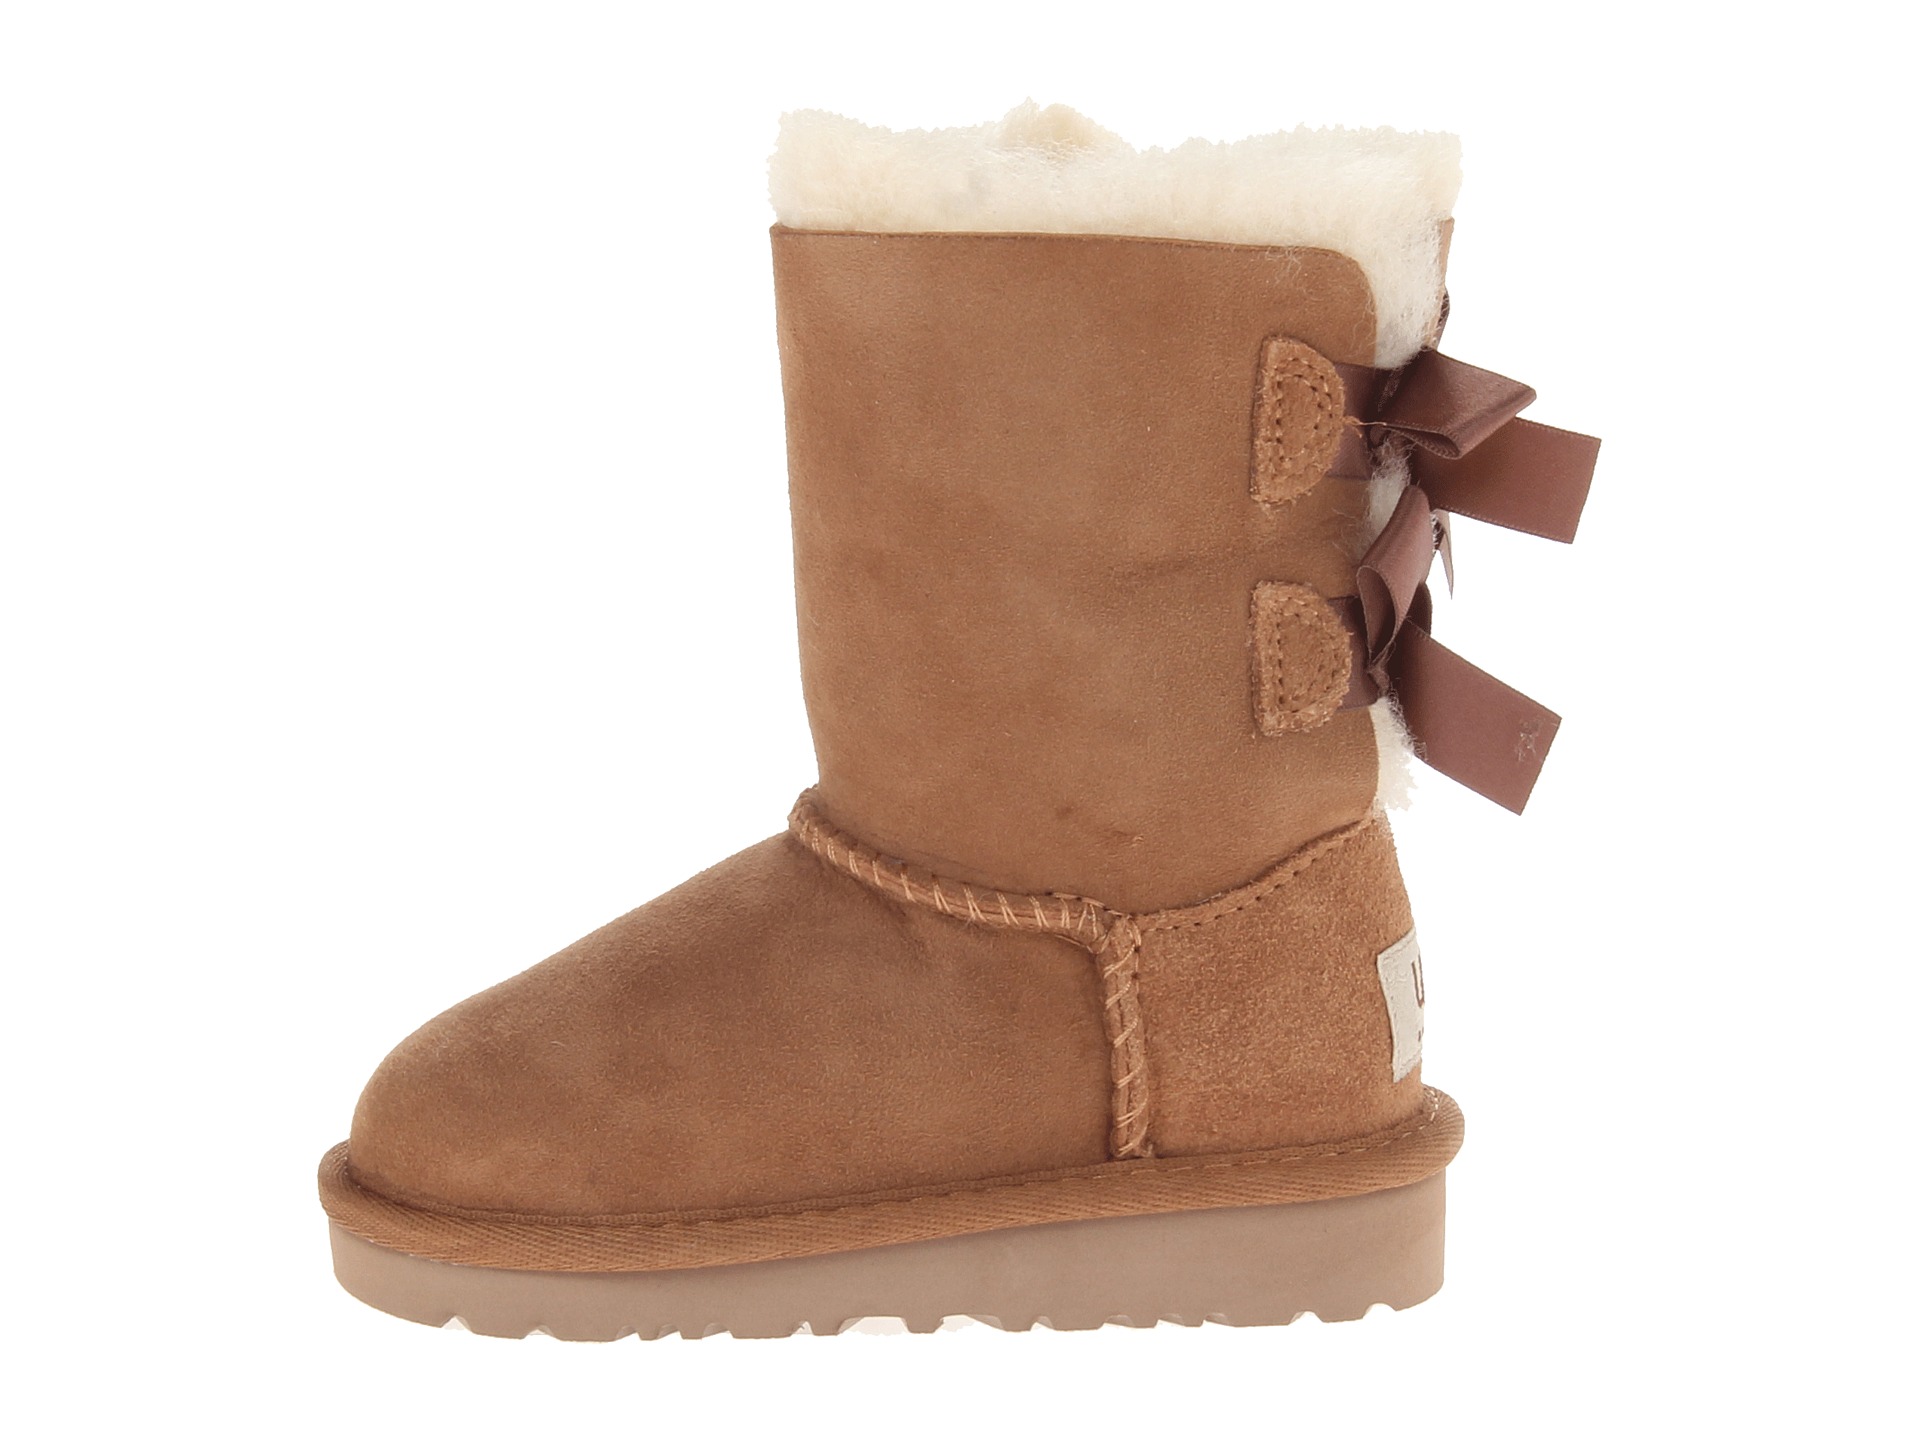 UGG Kids Bailey Bow (Toddler/Little Kid) at Zappos.com